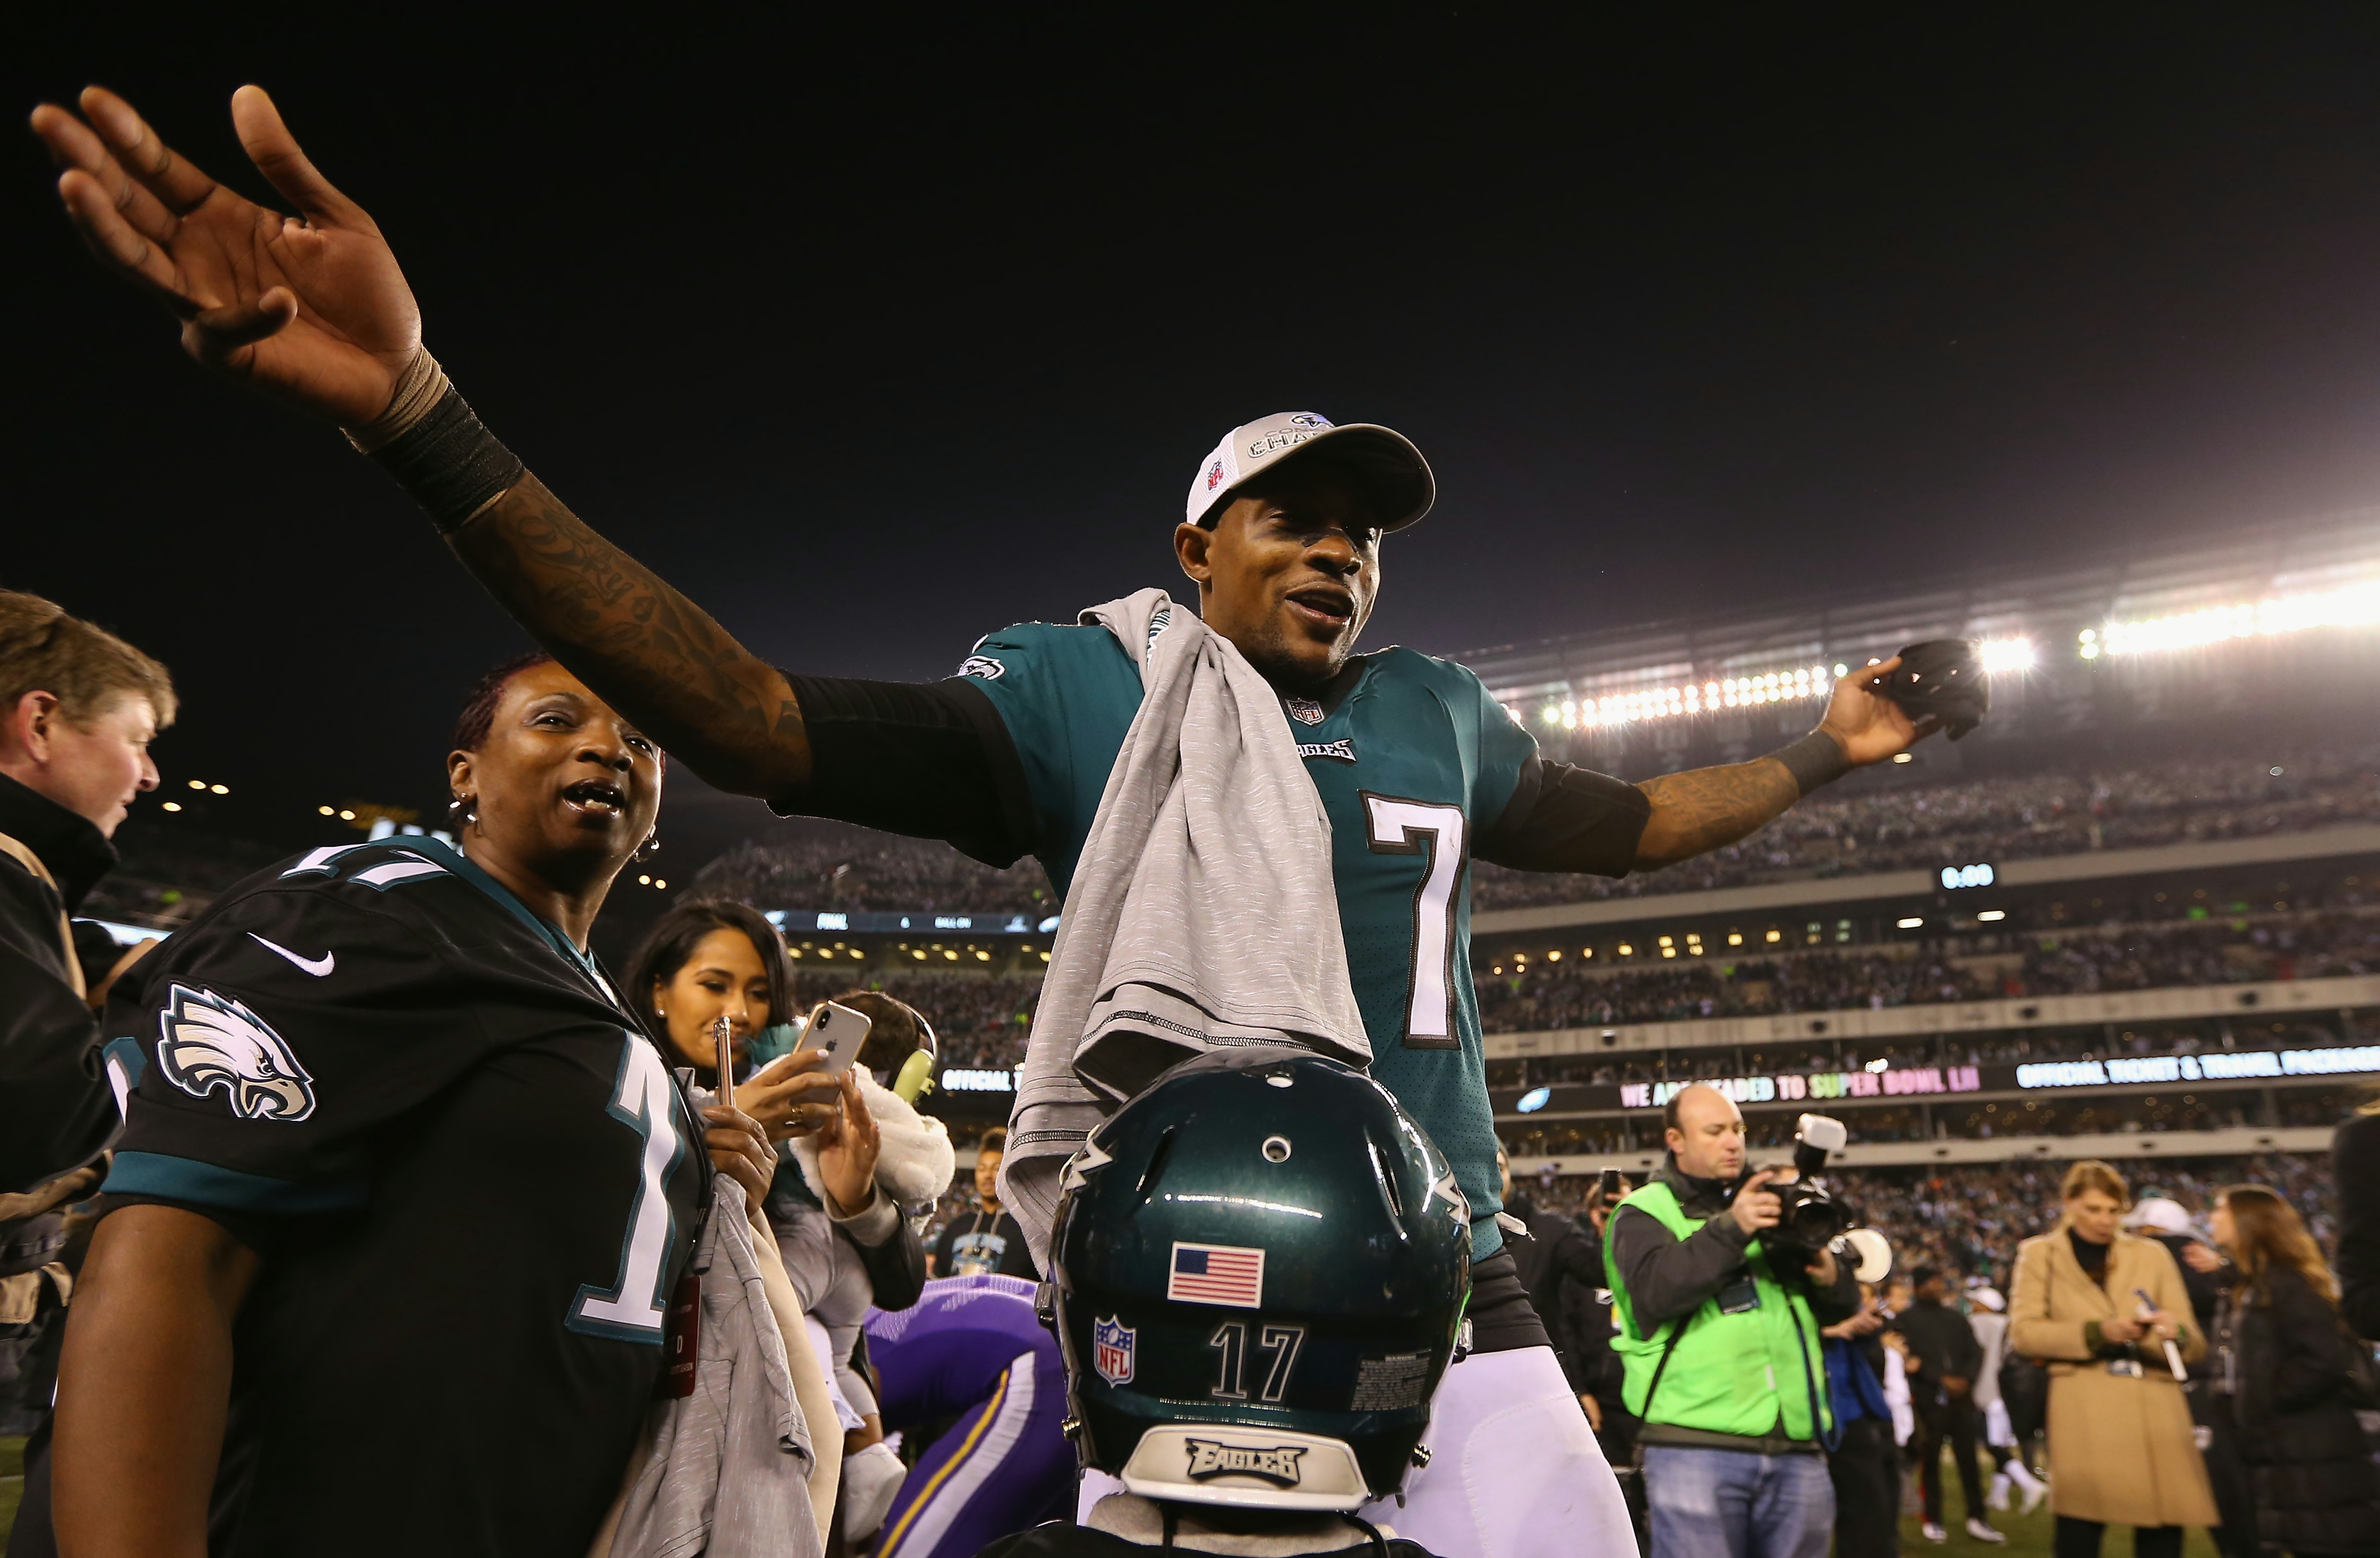 Philadelphia Eagles: The NFC Championship was won in March